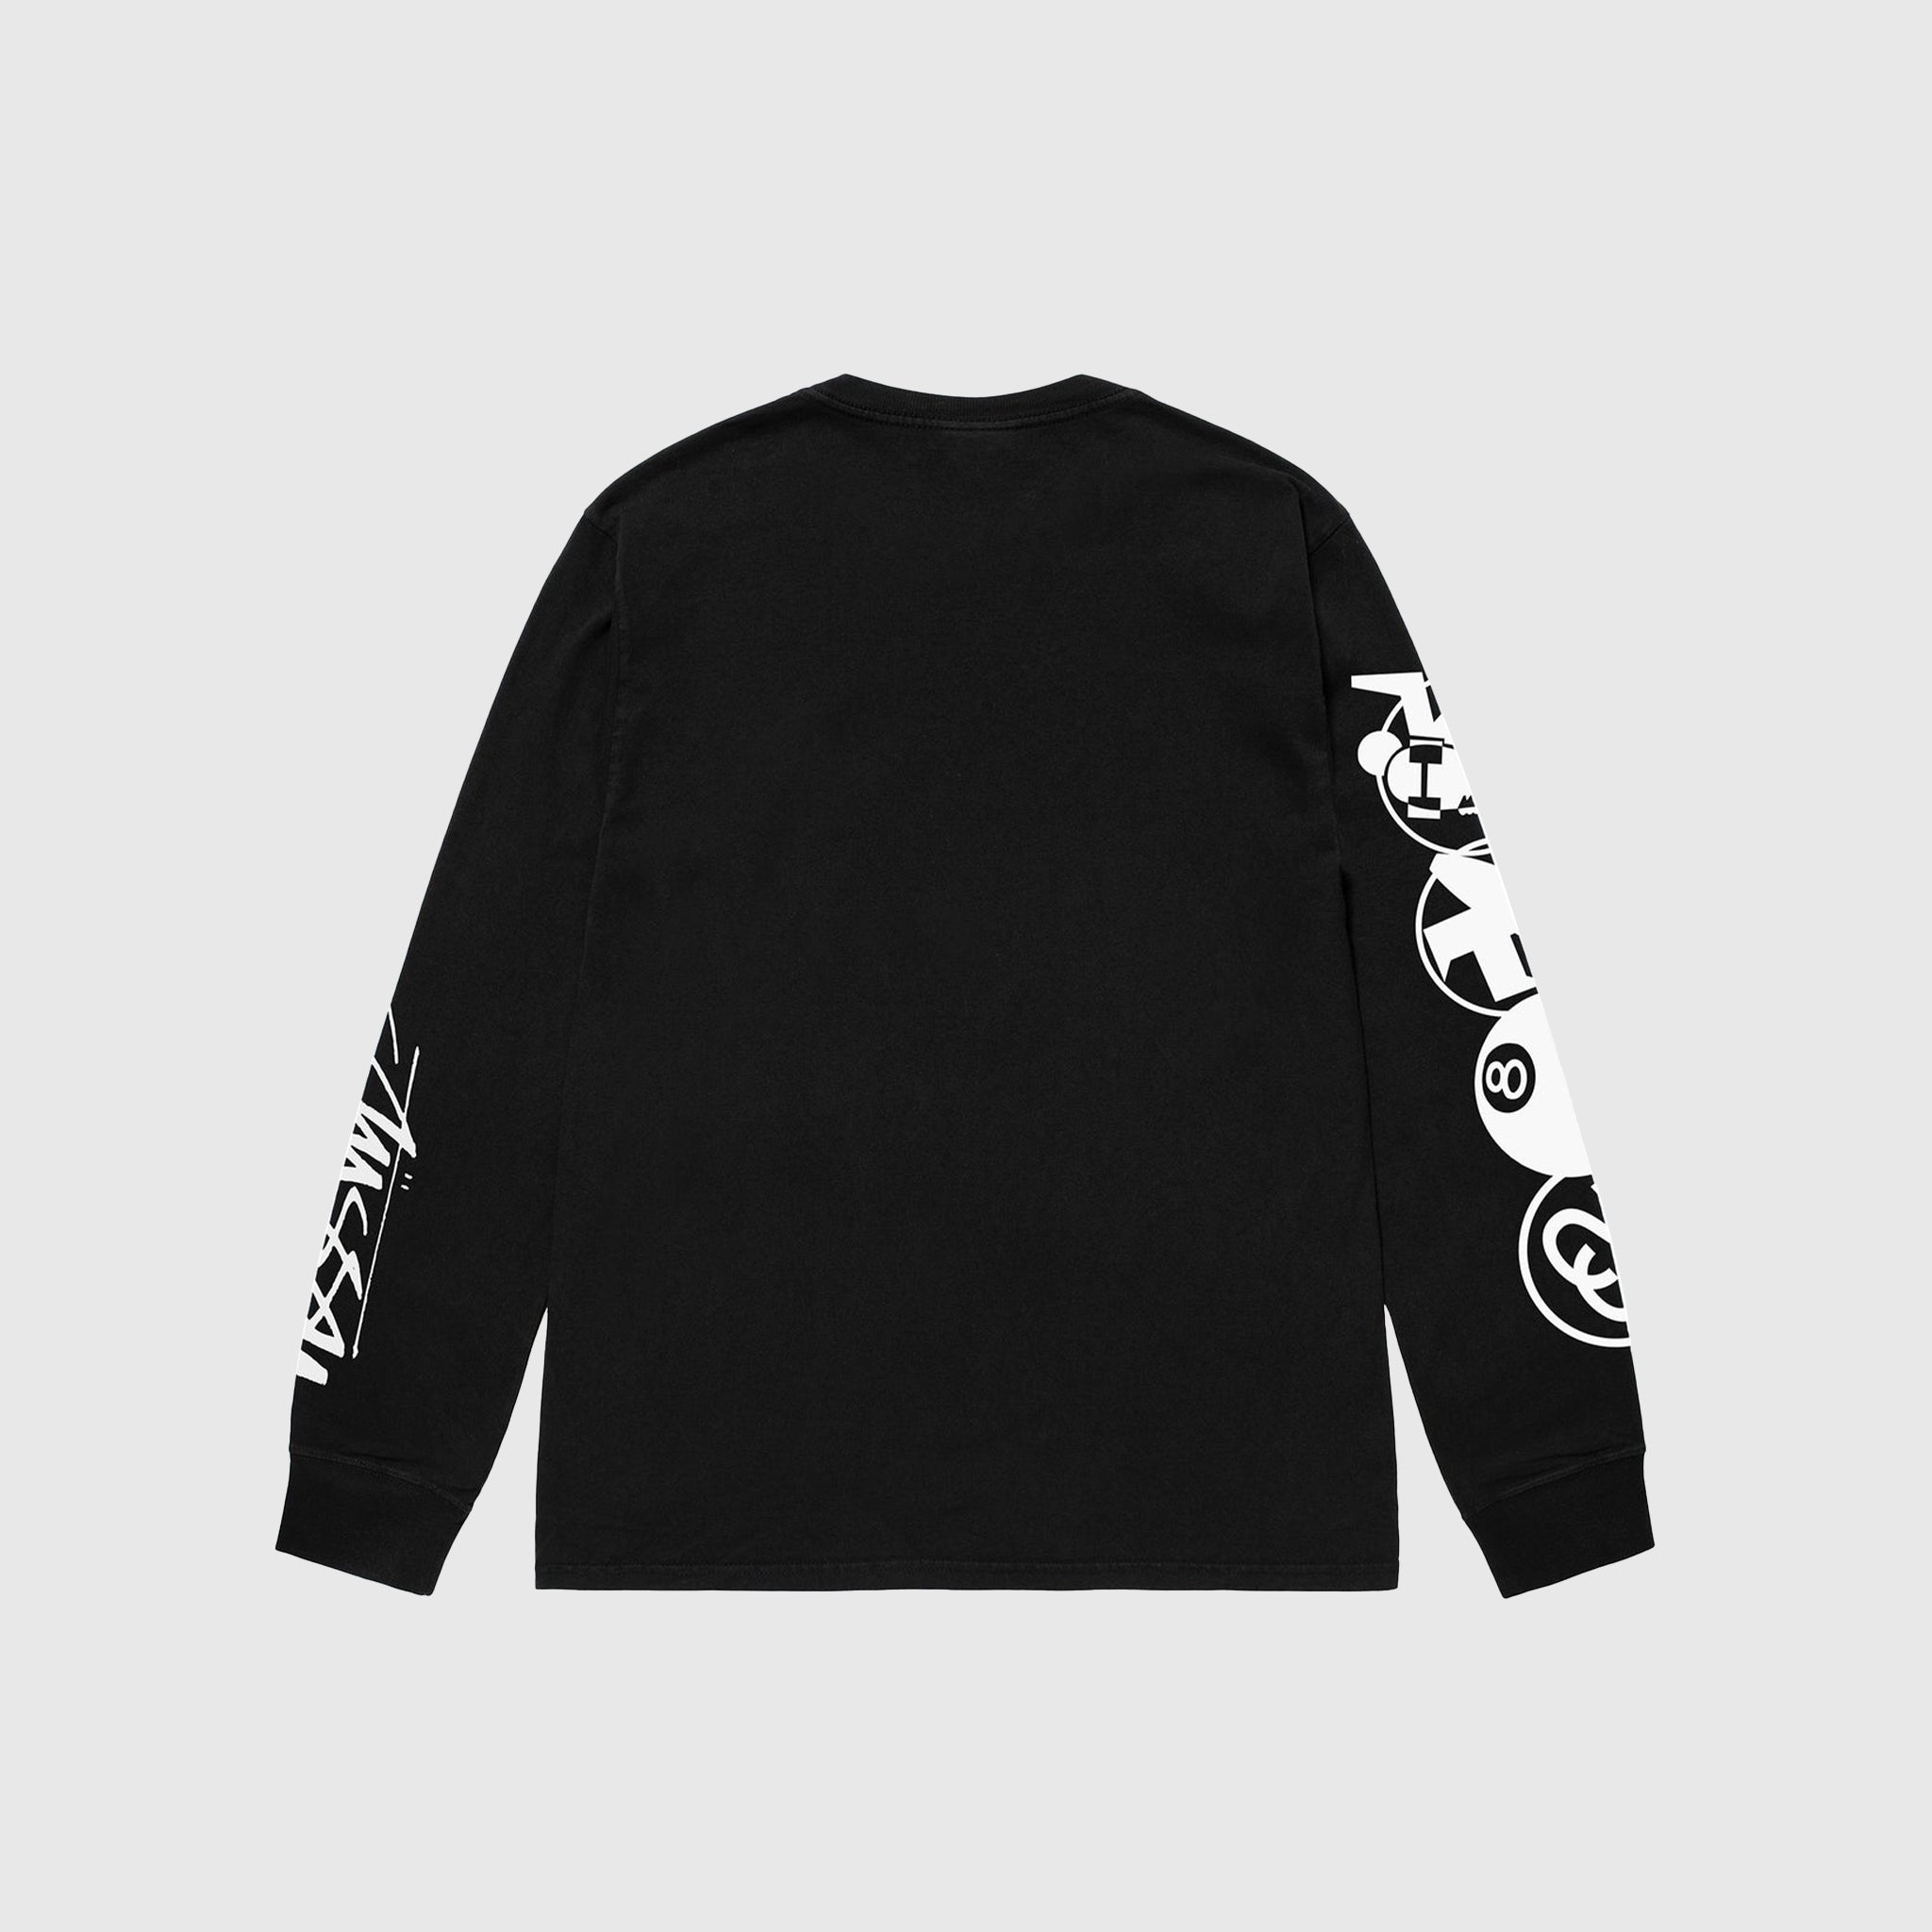 STACKED PIG. DYED  L/S T-SHIRT